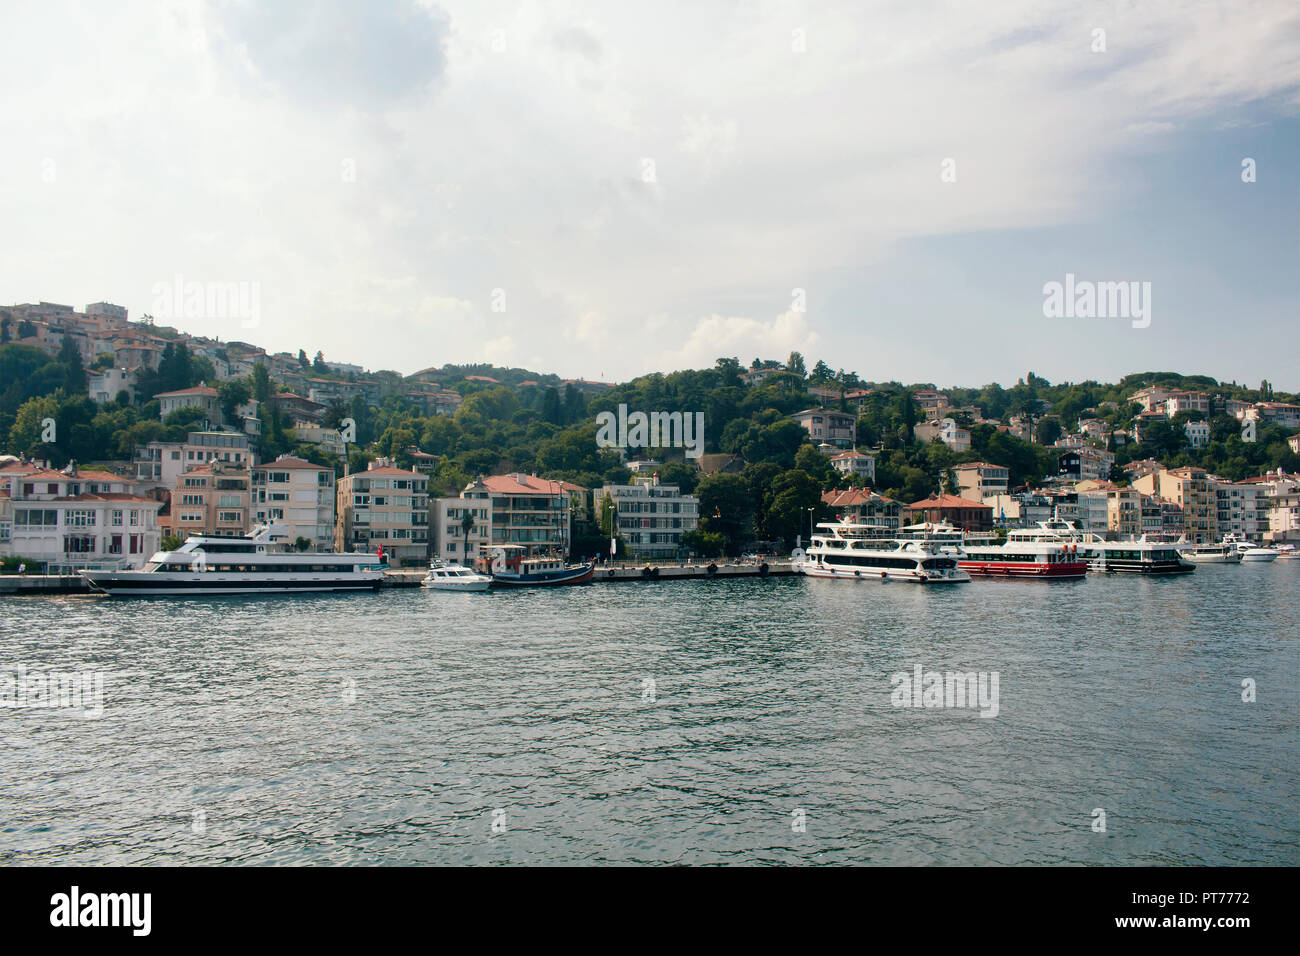 View of big motorboats, yachts, buildings on European side and Bosphorus in Istanbul. Stock Photo